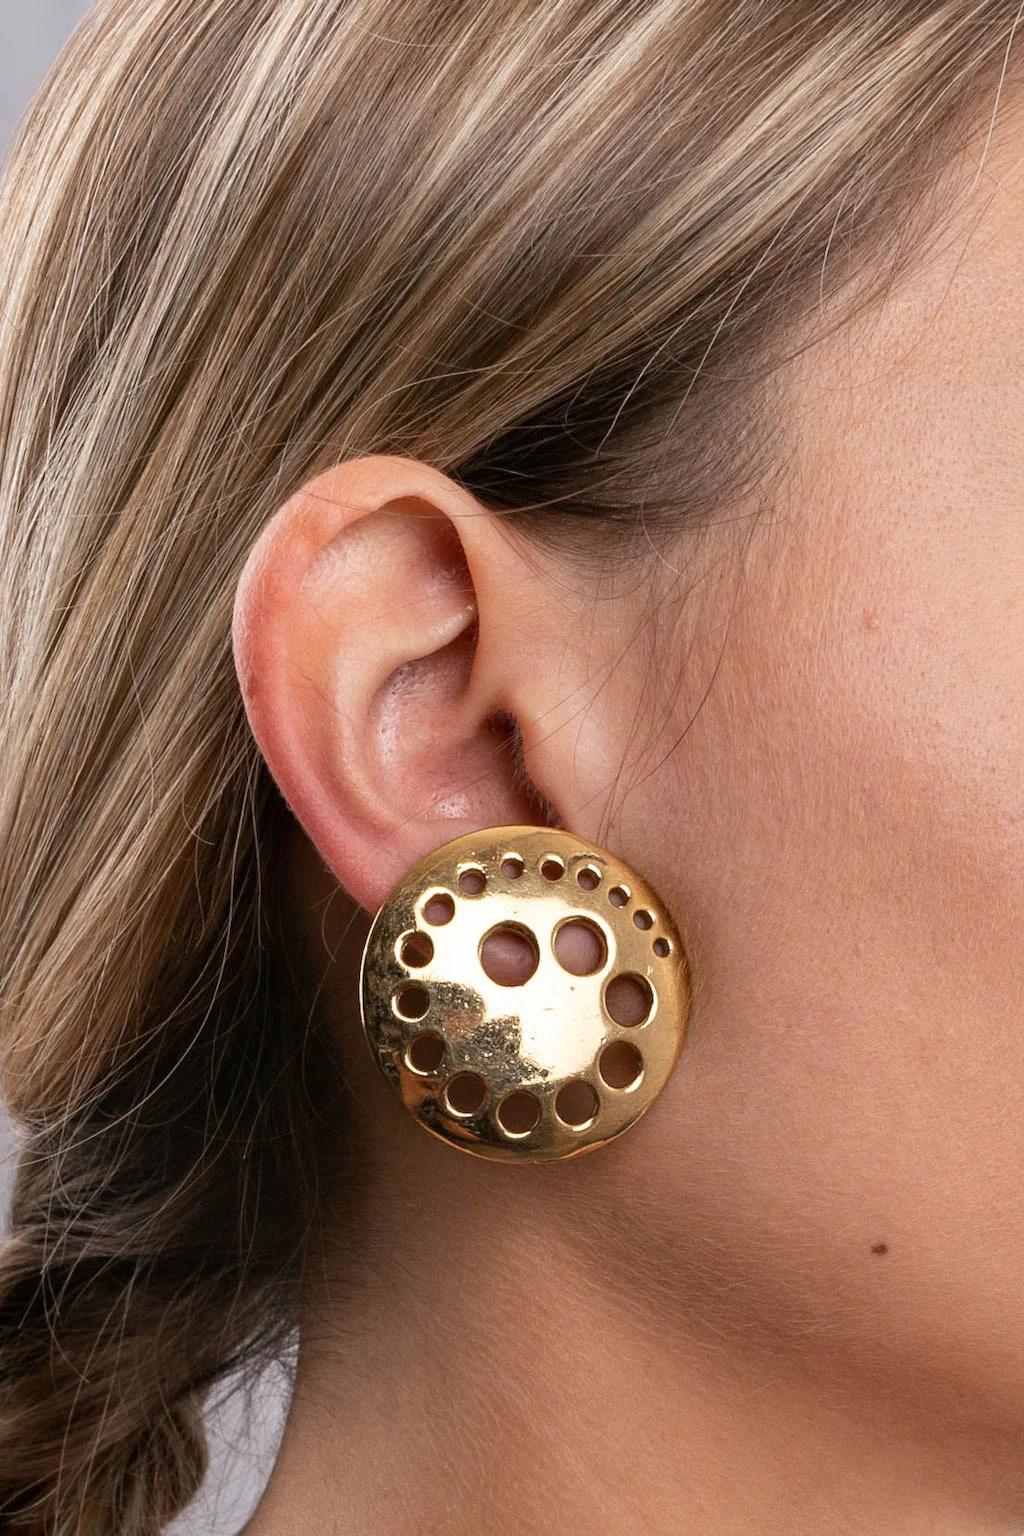 Paco Rabanne - Clip-on earrings in gilded metal.

Additional information:
Dimensions: 3.5 L cm (1.37